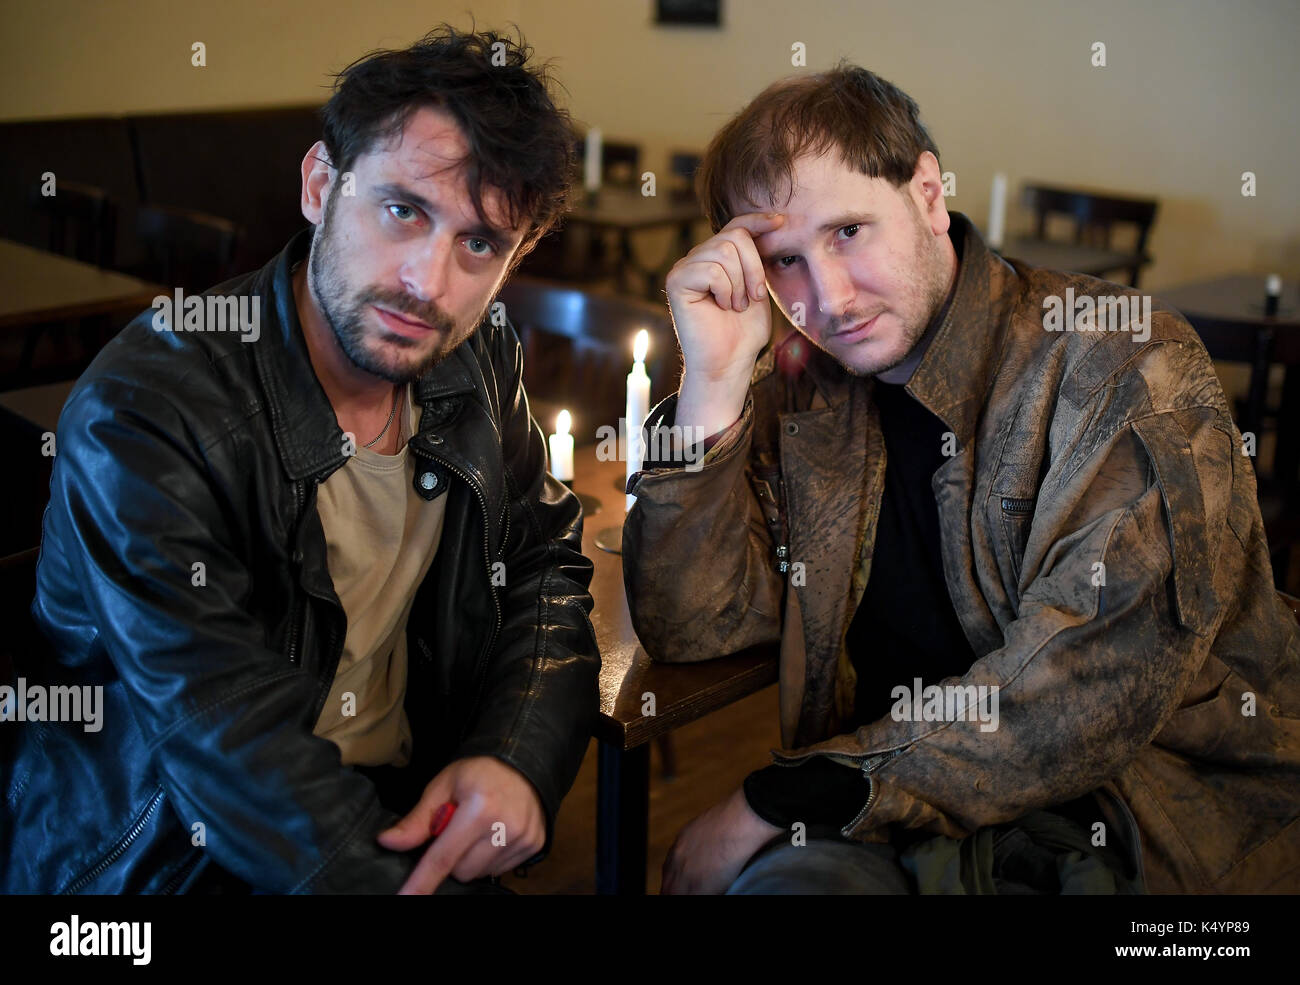 Berlin, Germany. 7th Sep, 2017. Guitarist Manuel Christoph Poppe (l) and  singer Michael Marco Fitzthum of the Austrian band Wanda, photographed  during an interview in Berlin, Germany, 7 September 2017. Photo: Britta